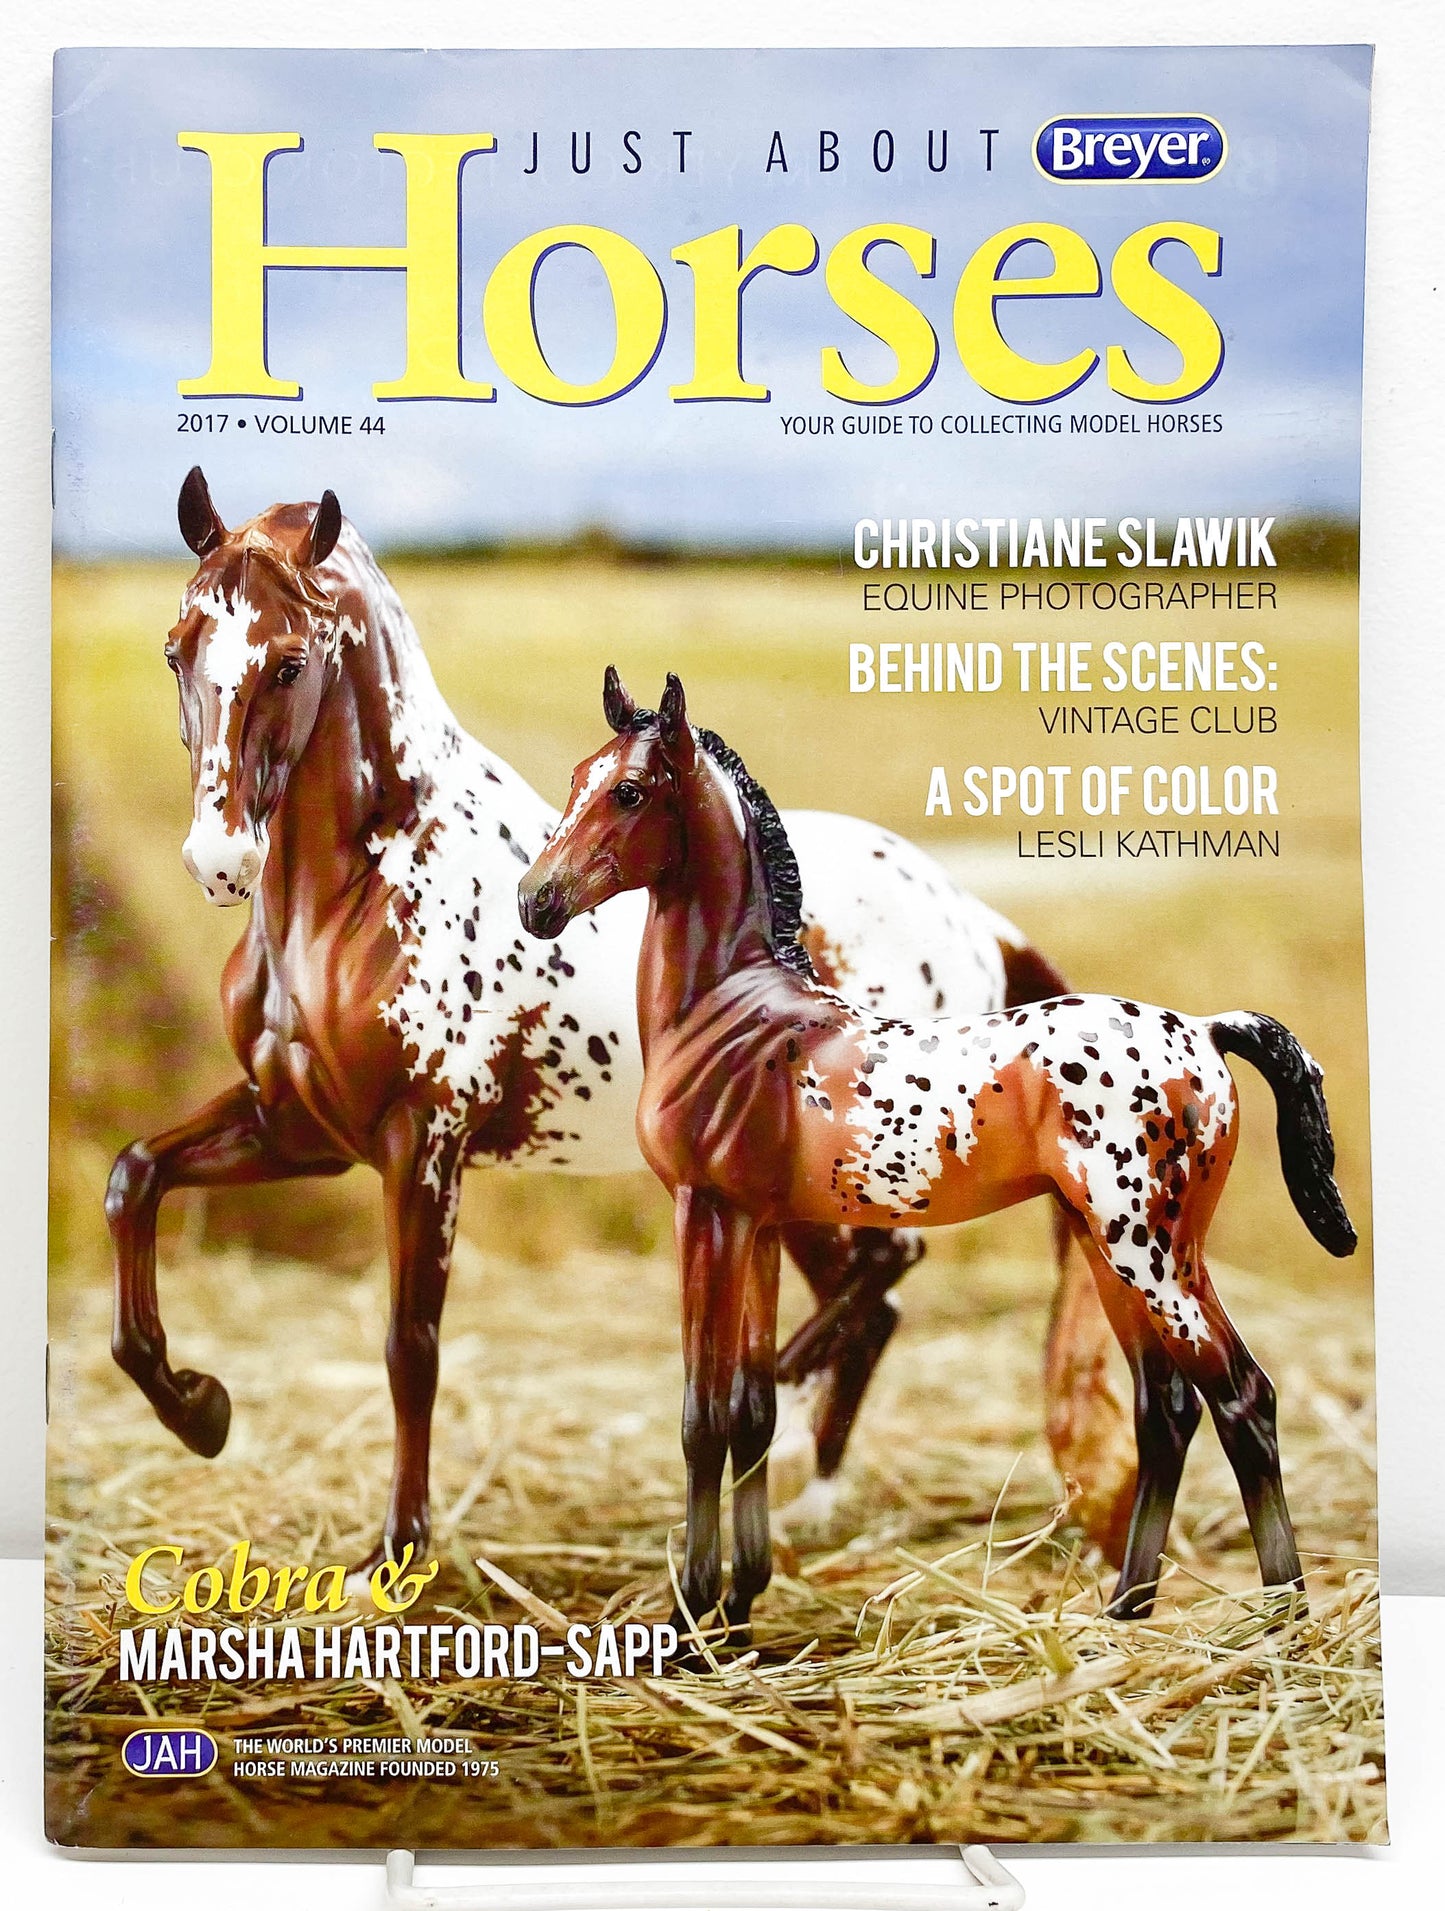 Just About Horses Magazine Vol. 44, 2017 Annual